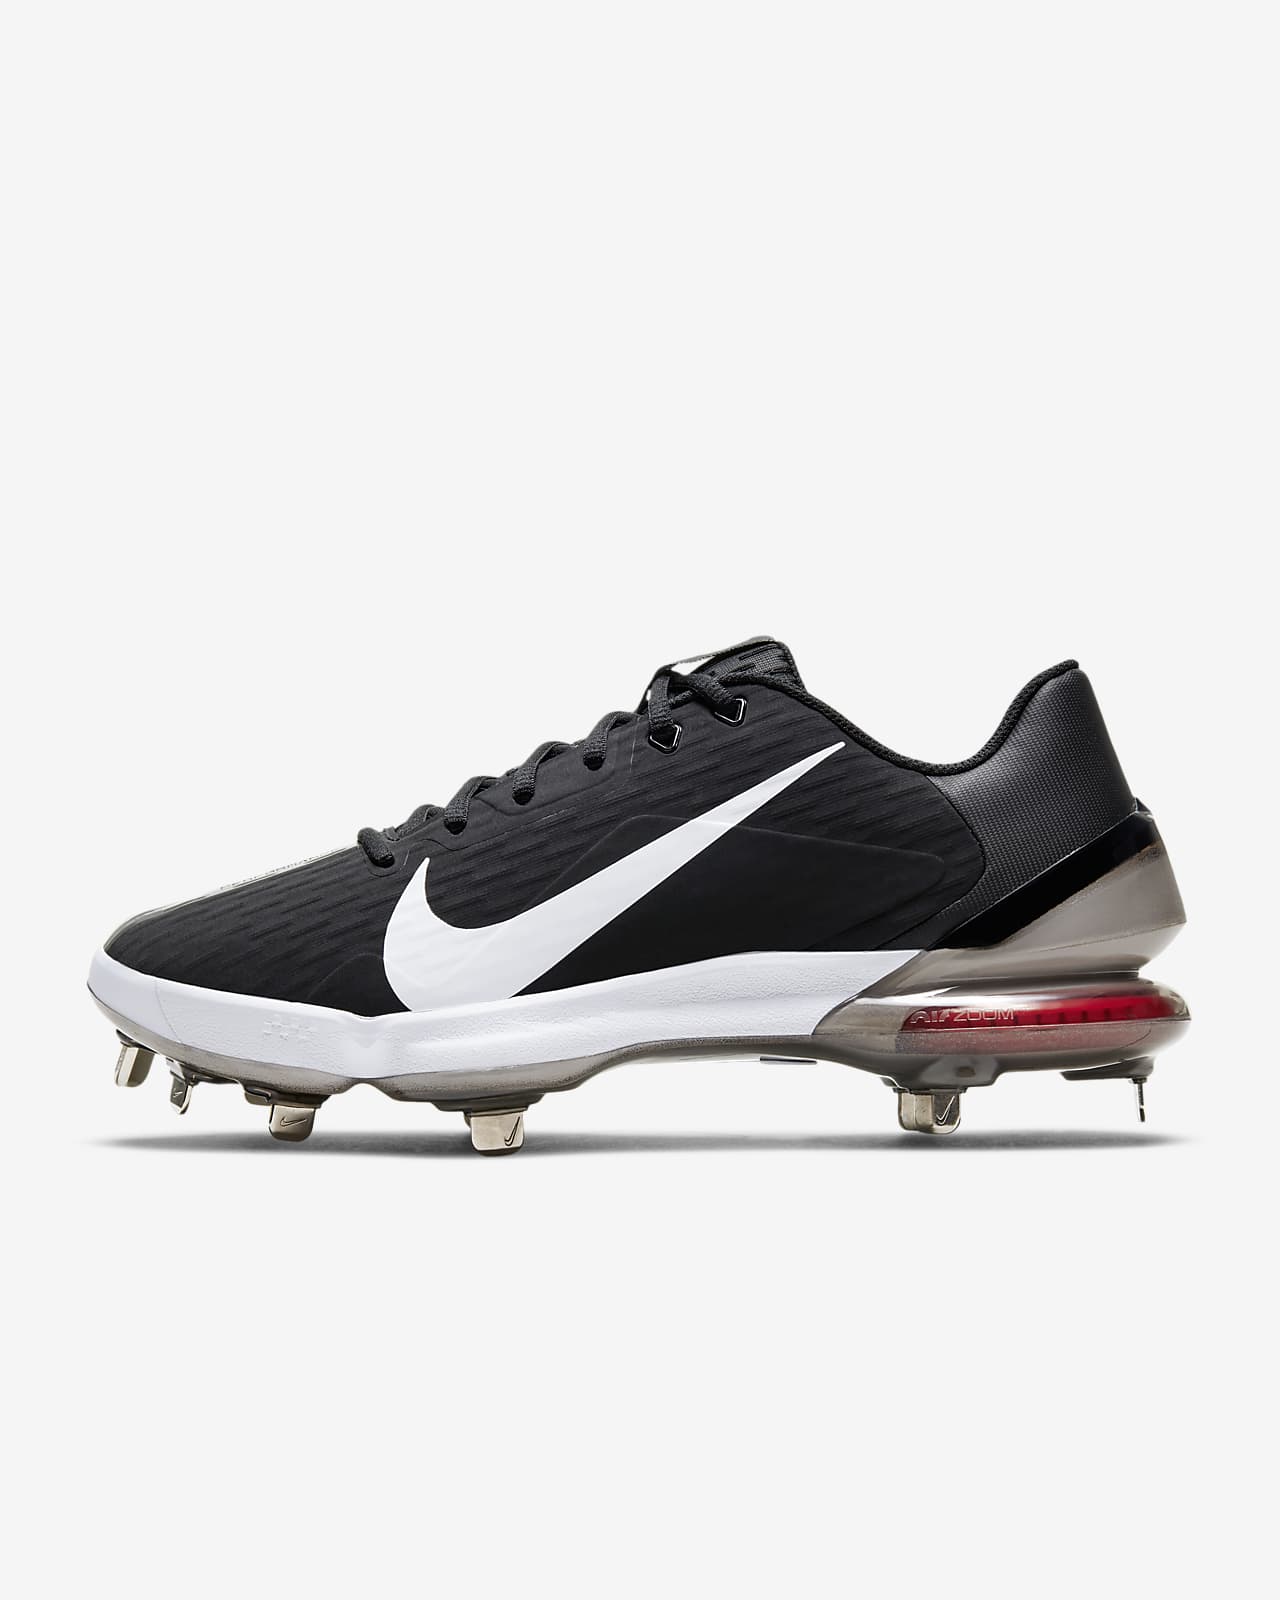 nike force zoom trout 5 men's mid metal baseball cleats - white/metallic red bronze/pure platinum